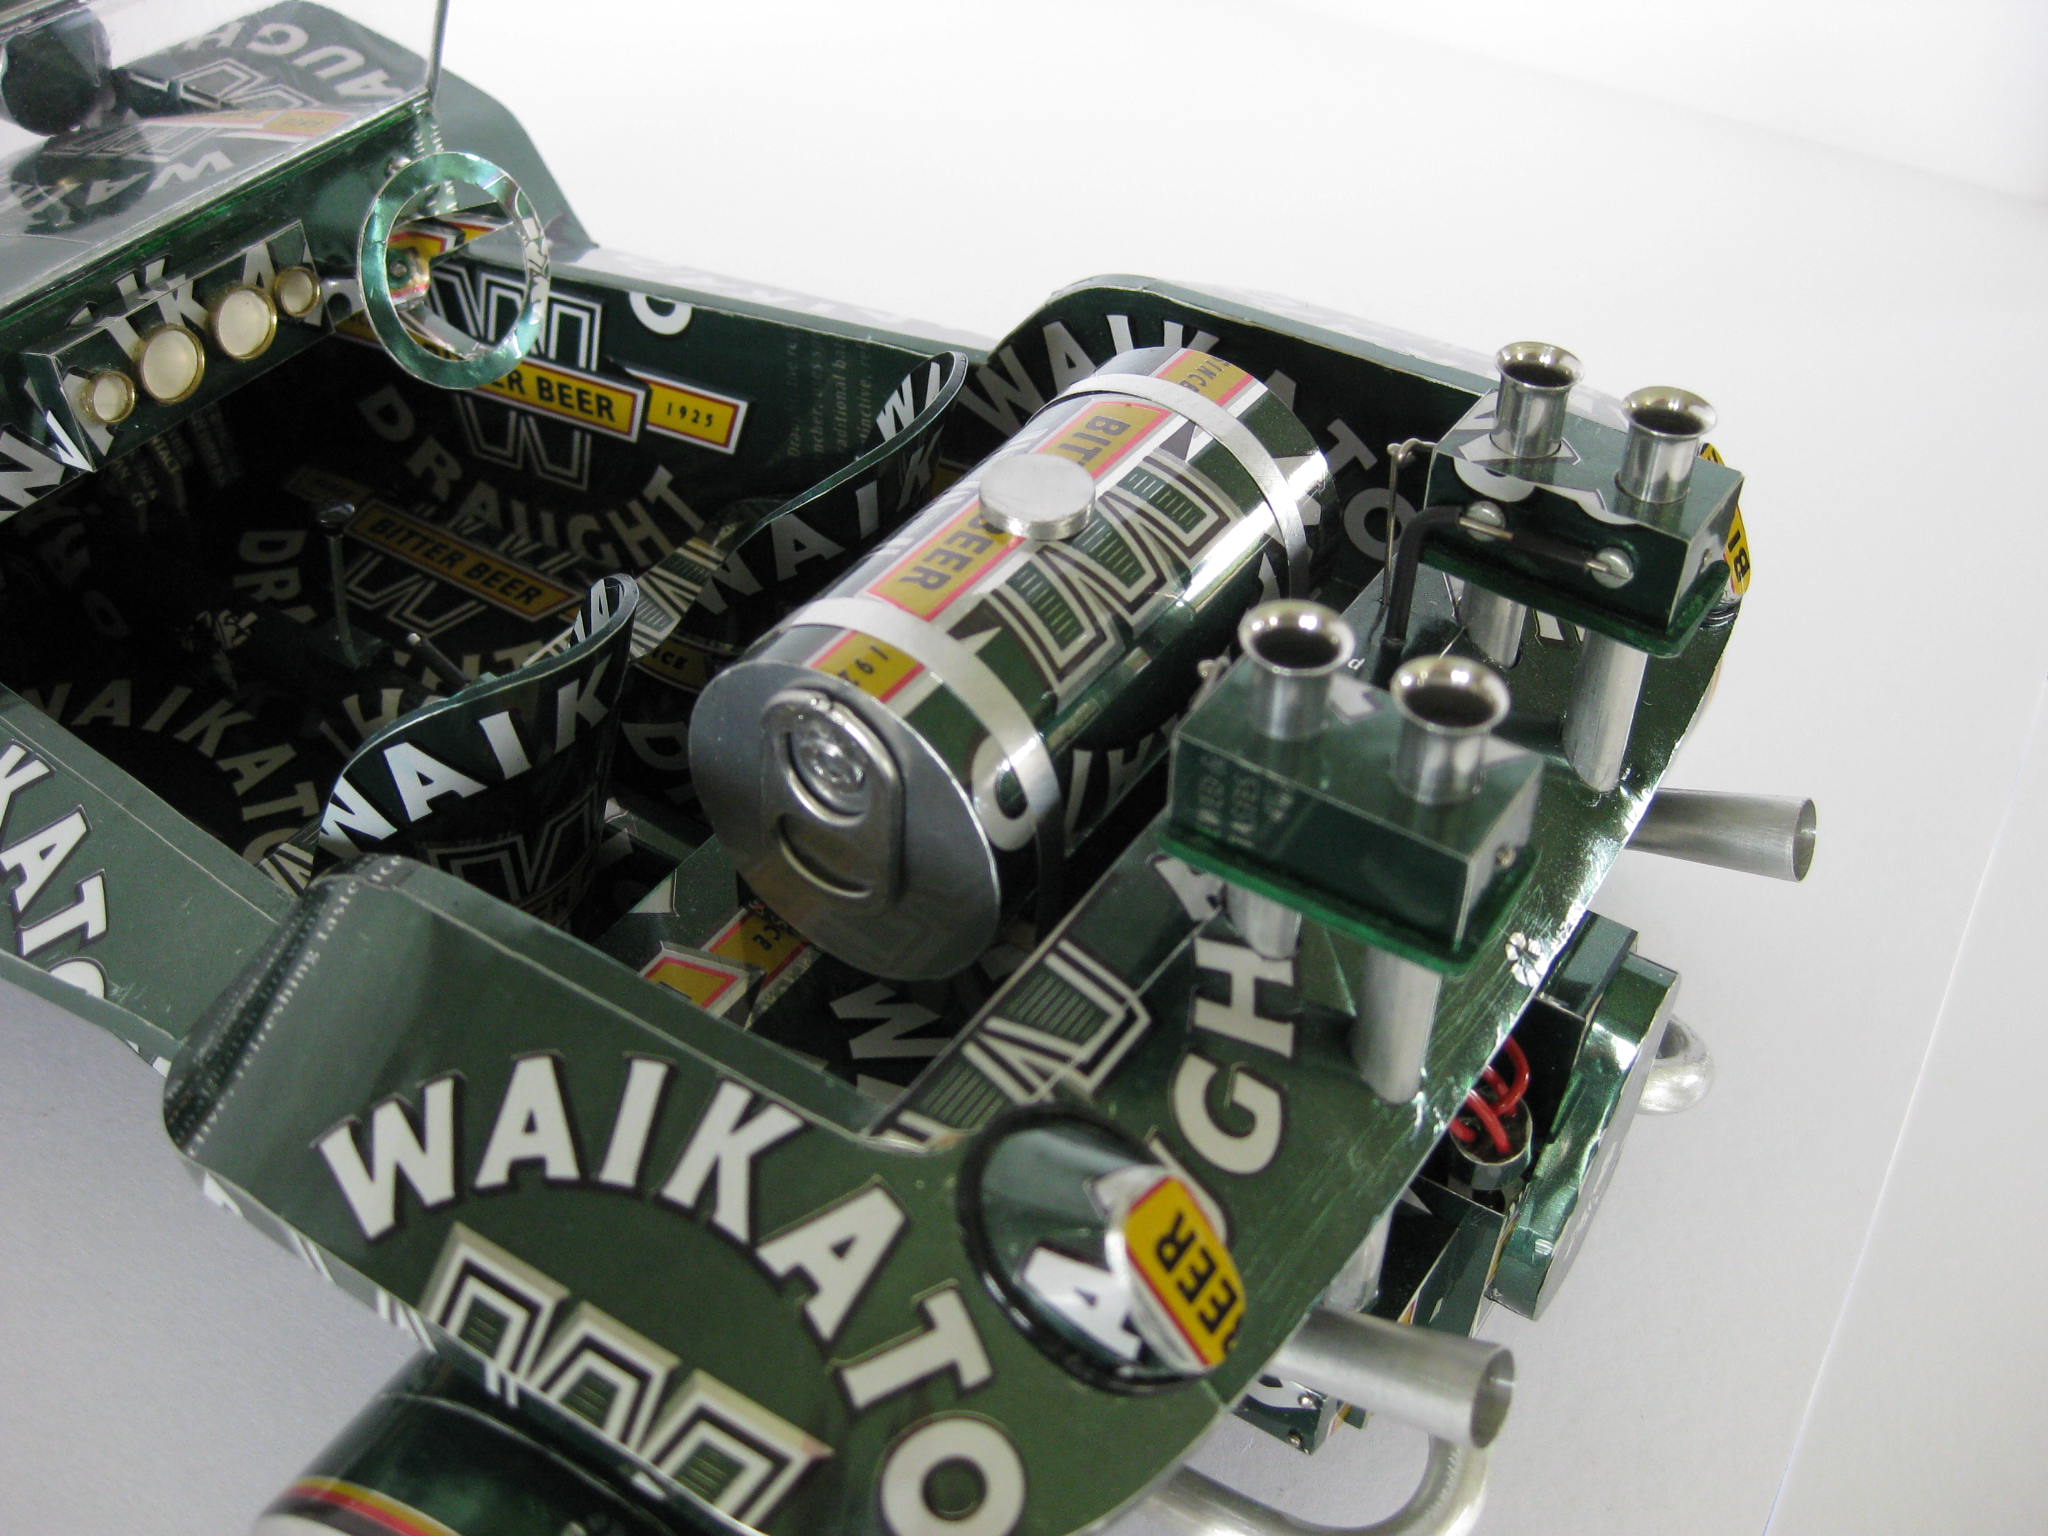 Vintage Model Cars Handmade With Dozens Of Cans